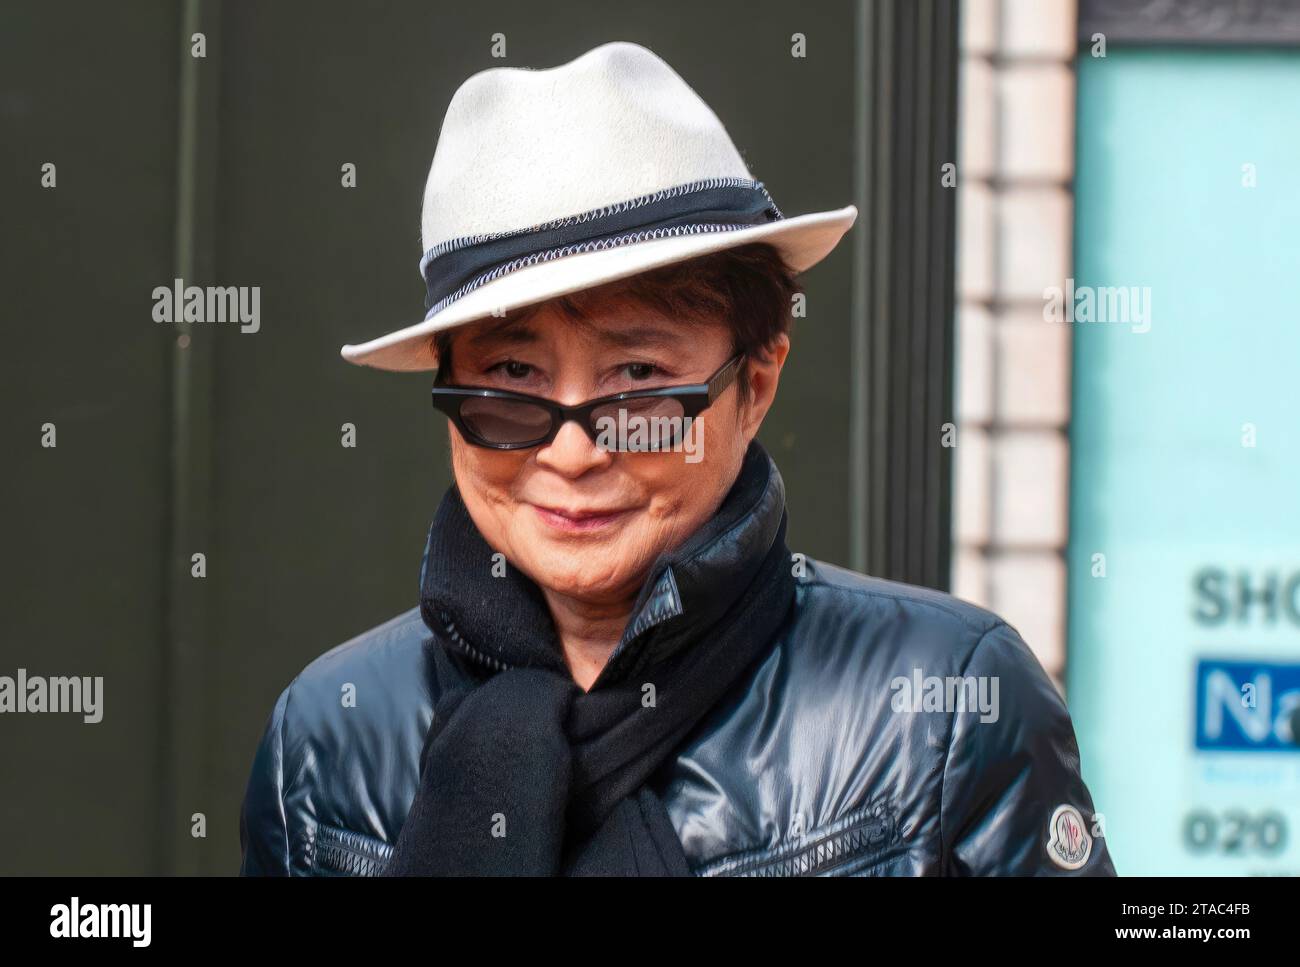 Who's that girl?   Yoko Ono - spotted walking in Green Park area today unnoticed by crowd enjoyed the spring sunshine. 17.3.10  She wore white panama Stock Photo